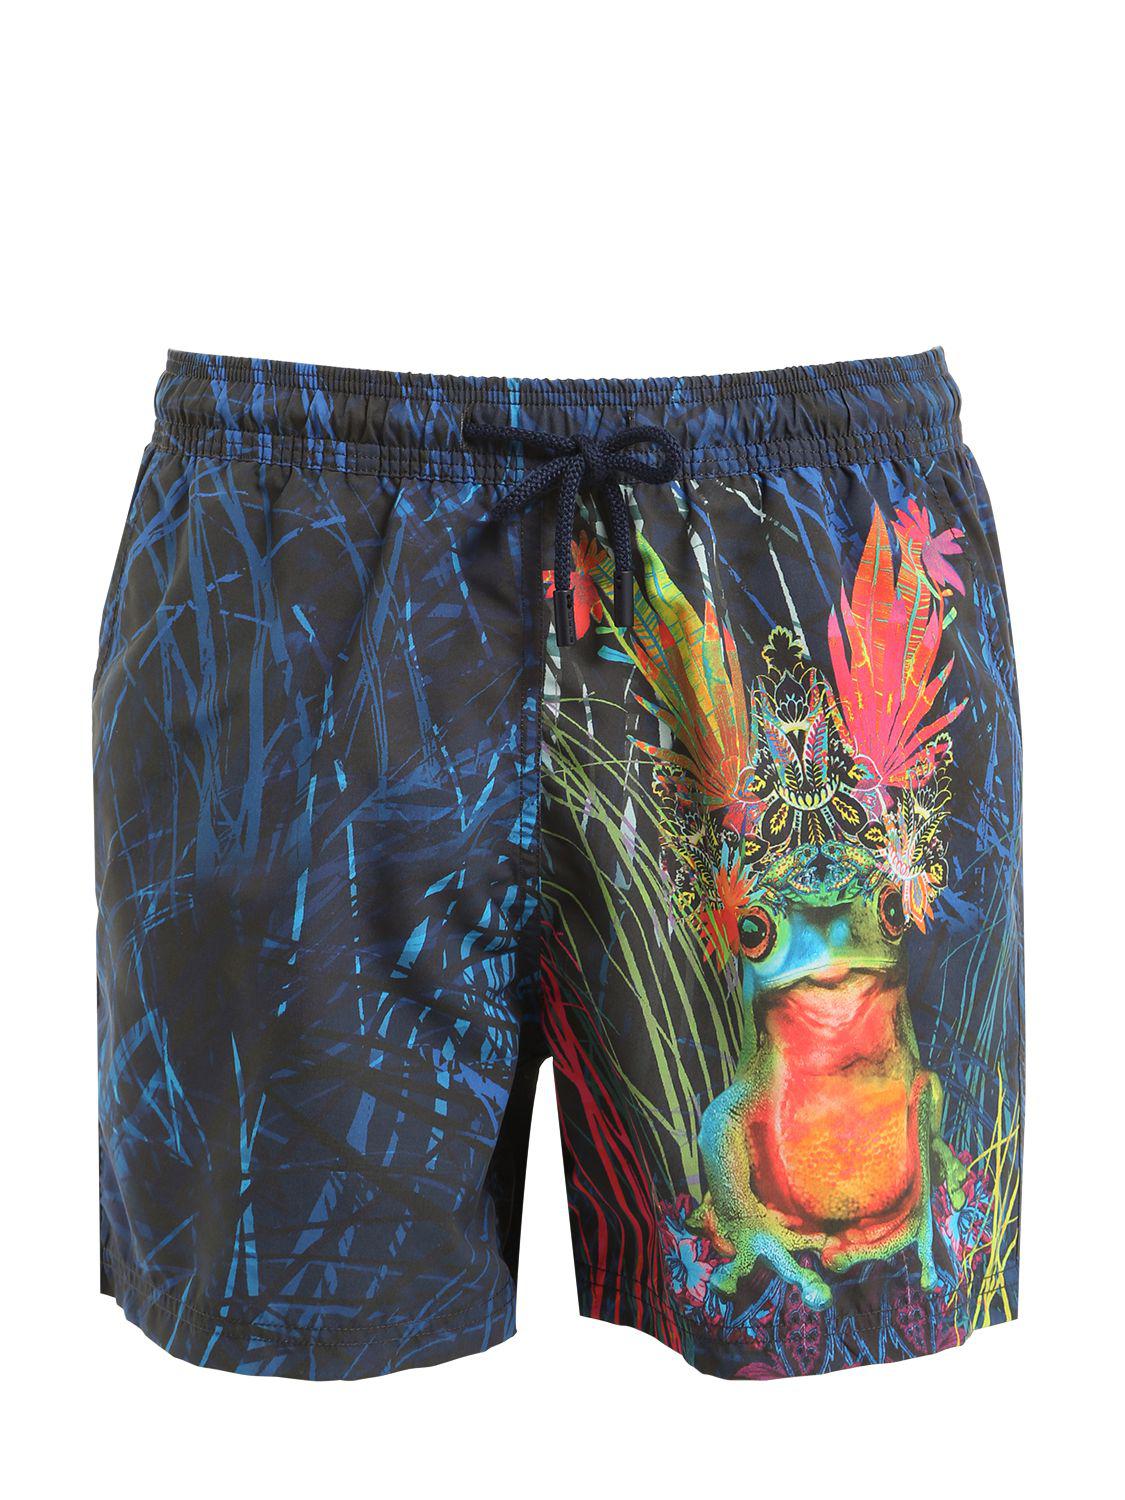 Etro Psychedelic Frog Printed Swim Shorts in Blue for Men - Lyst